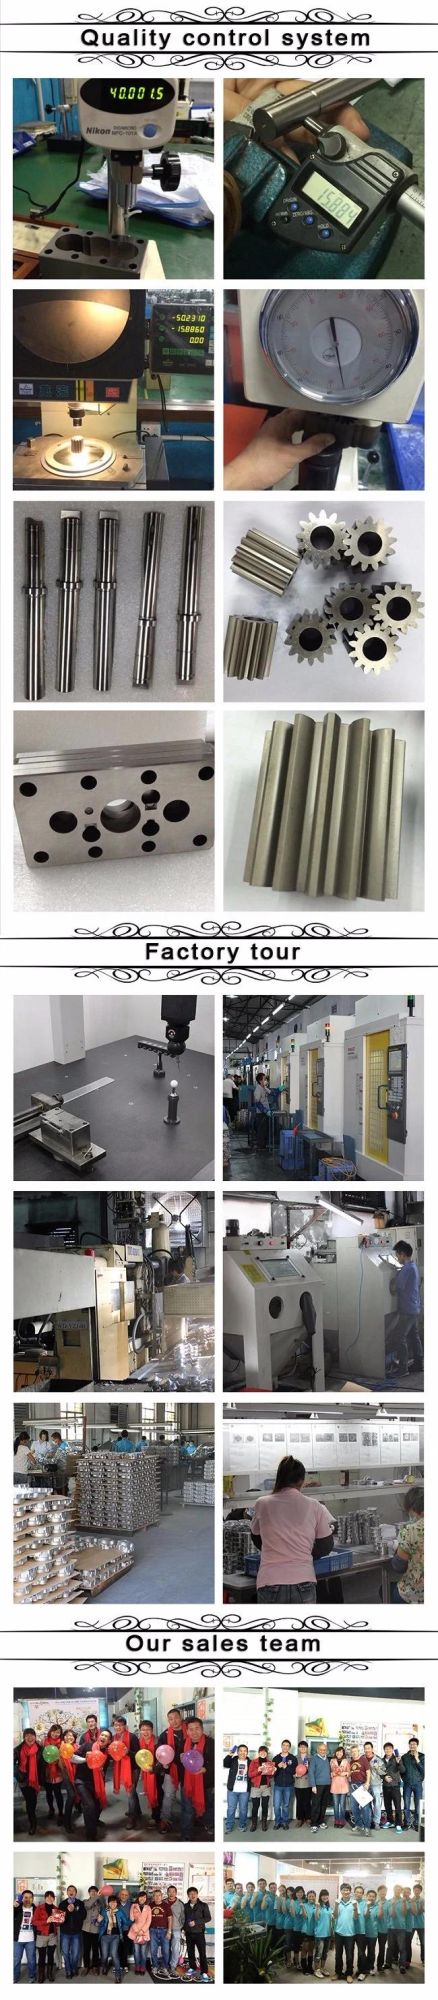 Plastic Injection Molding Parts